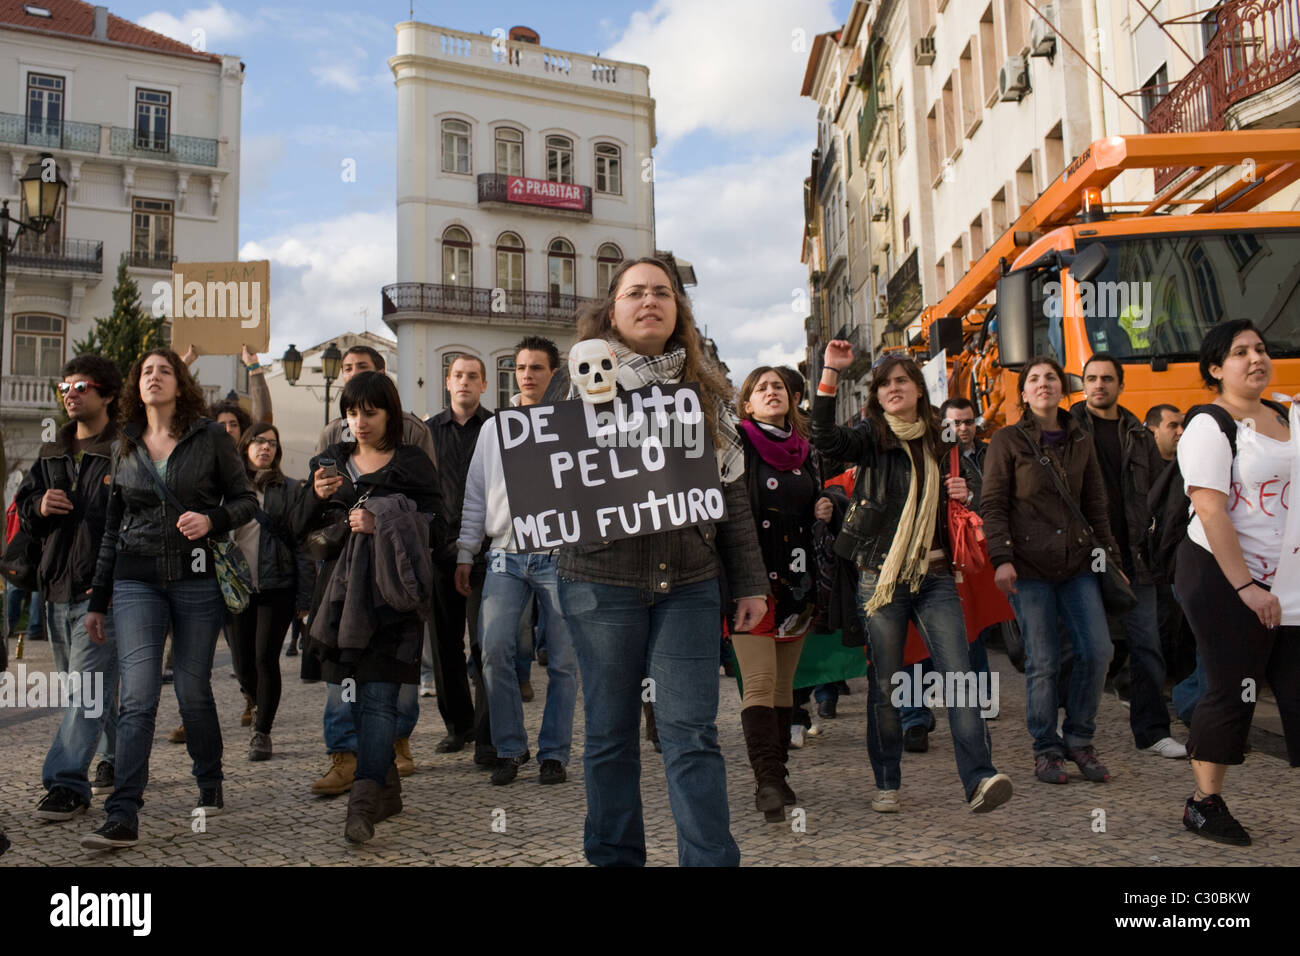 Anti-bank, pro-jobs protest in Coimbra, Portugal Stock Photo